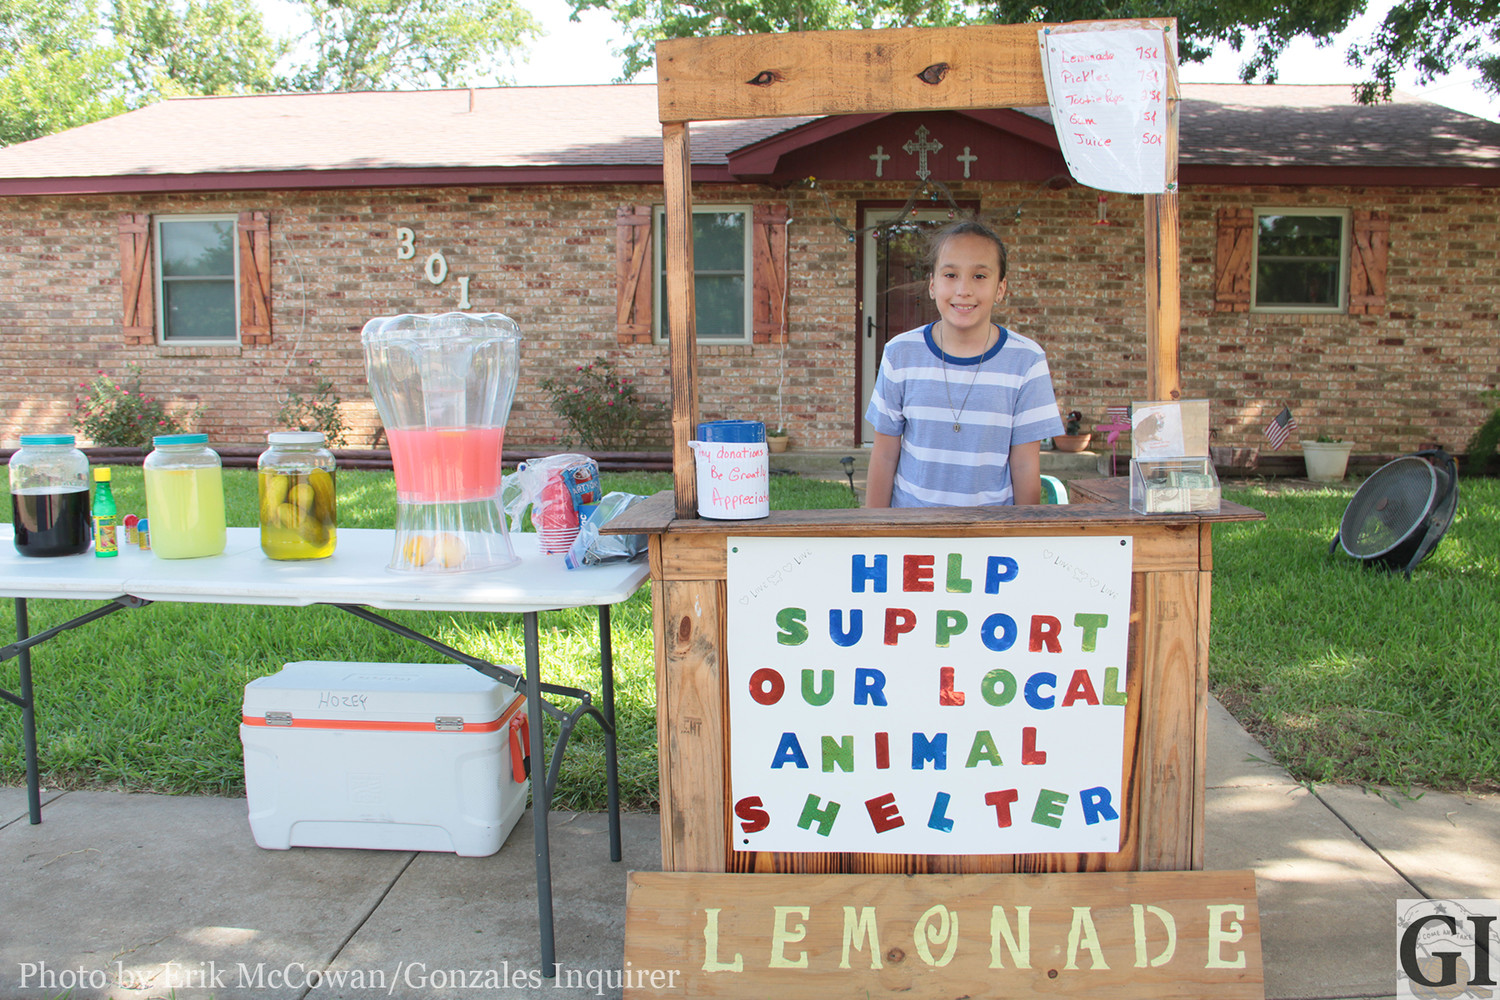 Rylee Alvarez has decided to spend the dog days of summer by helping the Passion for Paws Animal Shelter in Nixon. Her lemonade stand is a personal project to raise money for the shelter and can be found at 301 E. 6th St. in Nixon. She is usually at the stand on Friday and Saturday afternoons.